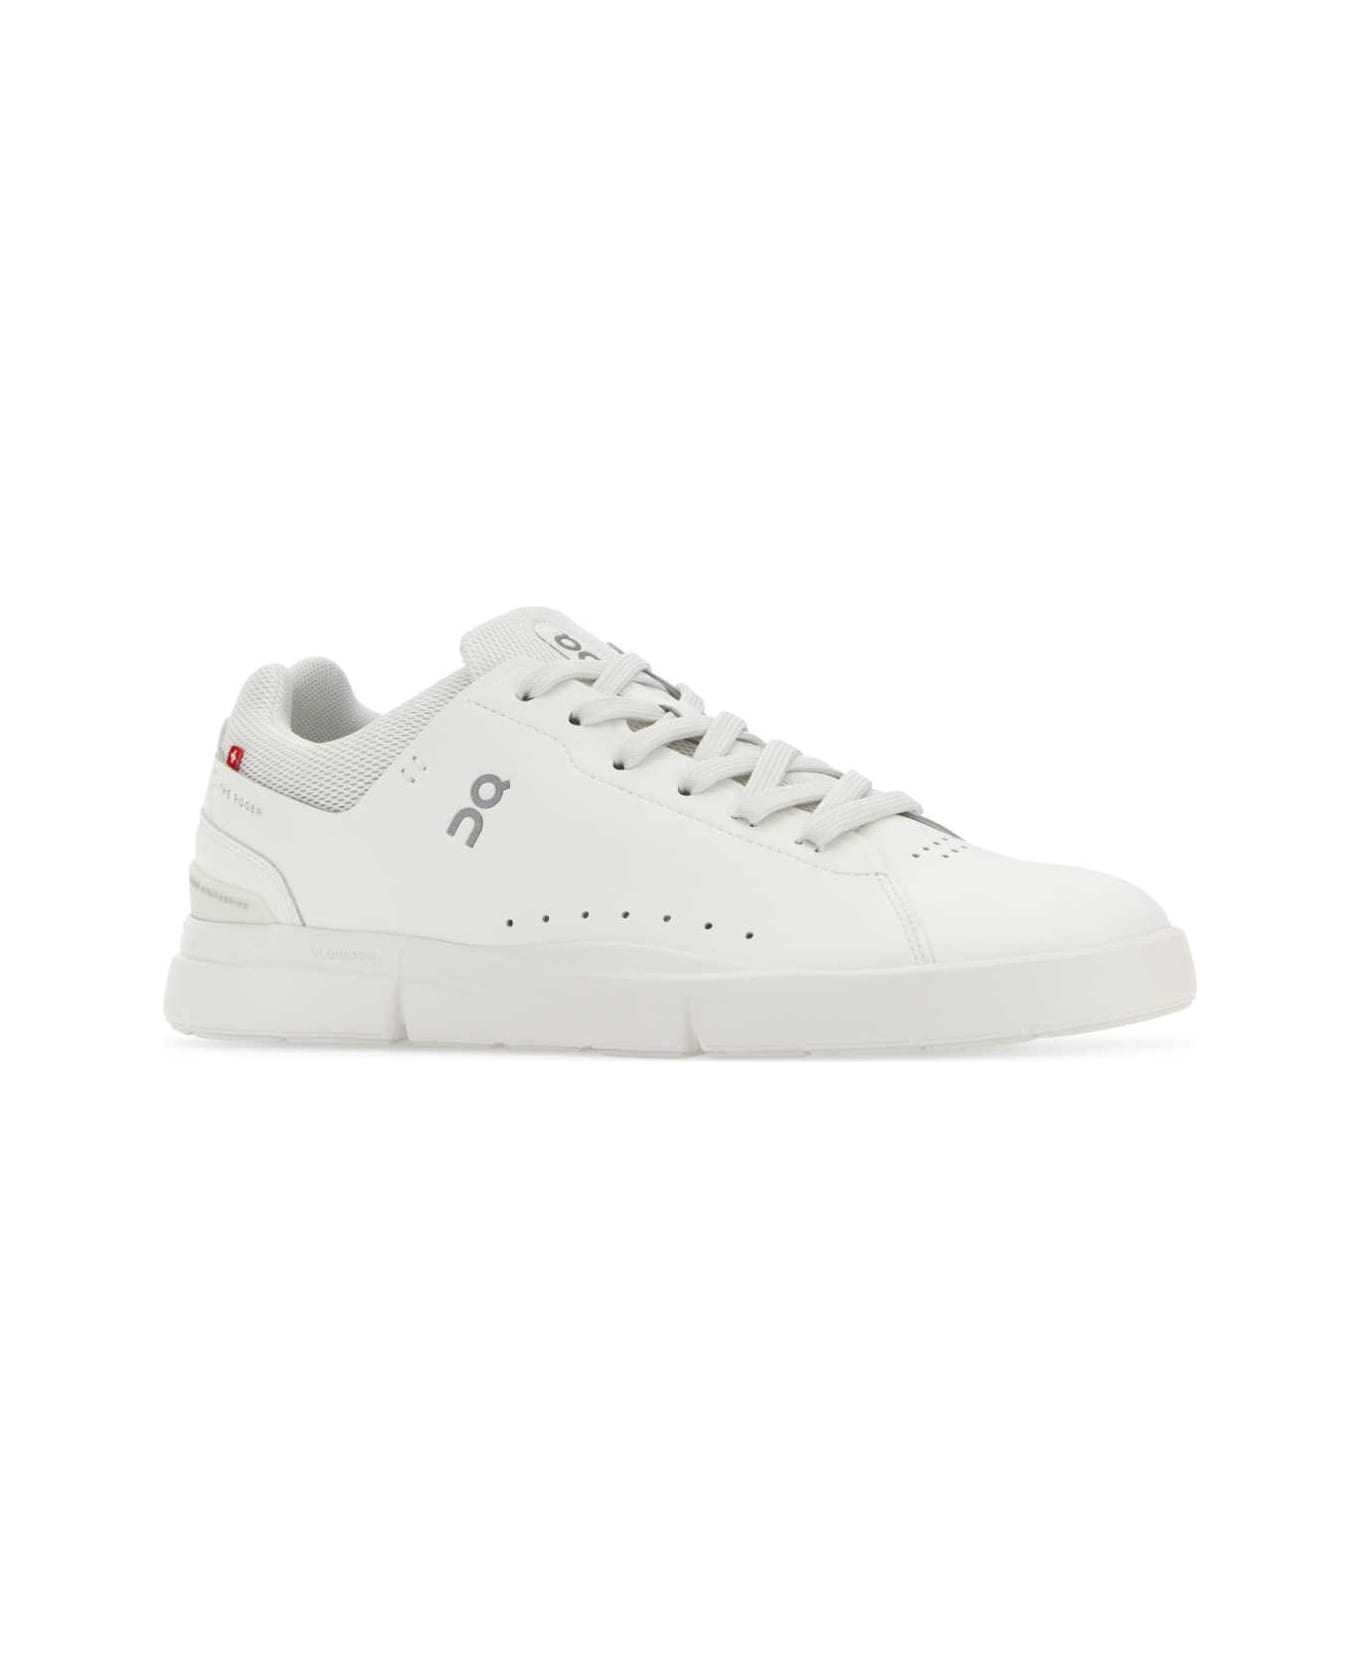 ON White Synthetic Leather And Mesh The Roger Advantage Sneakers - ALLWHITE